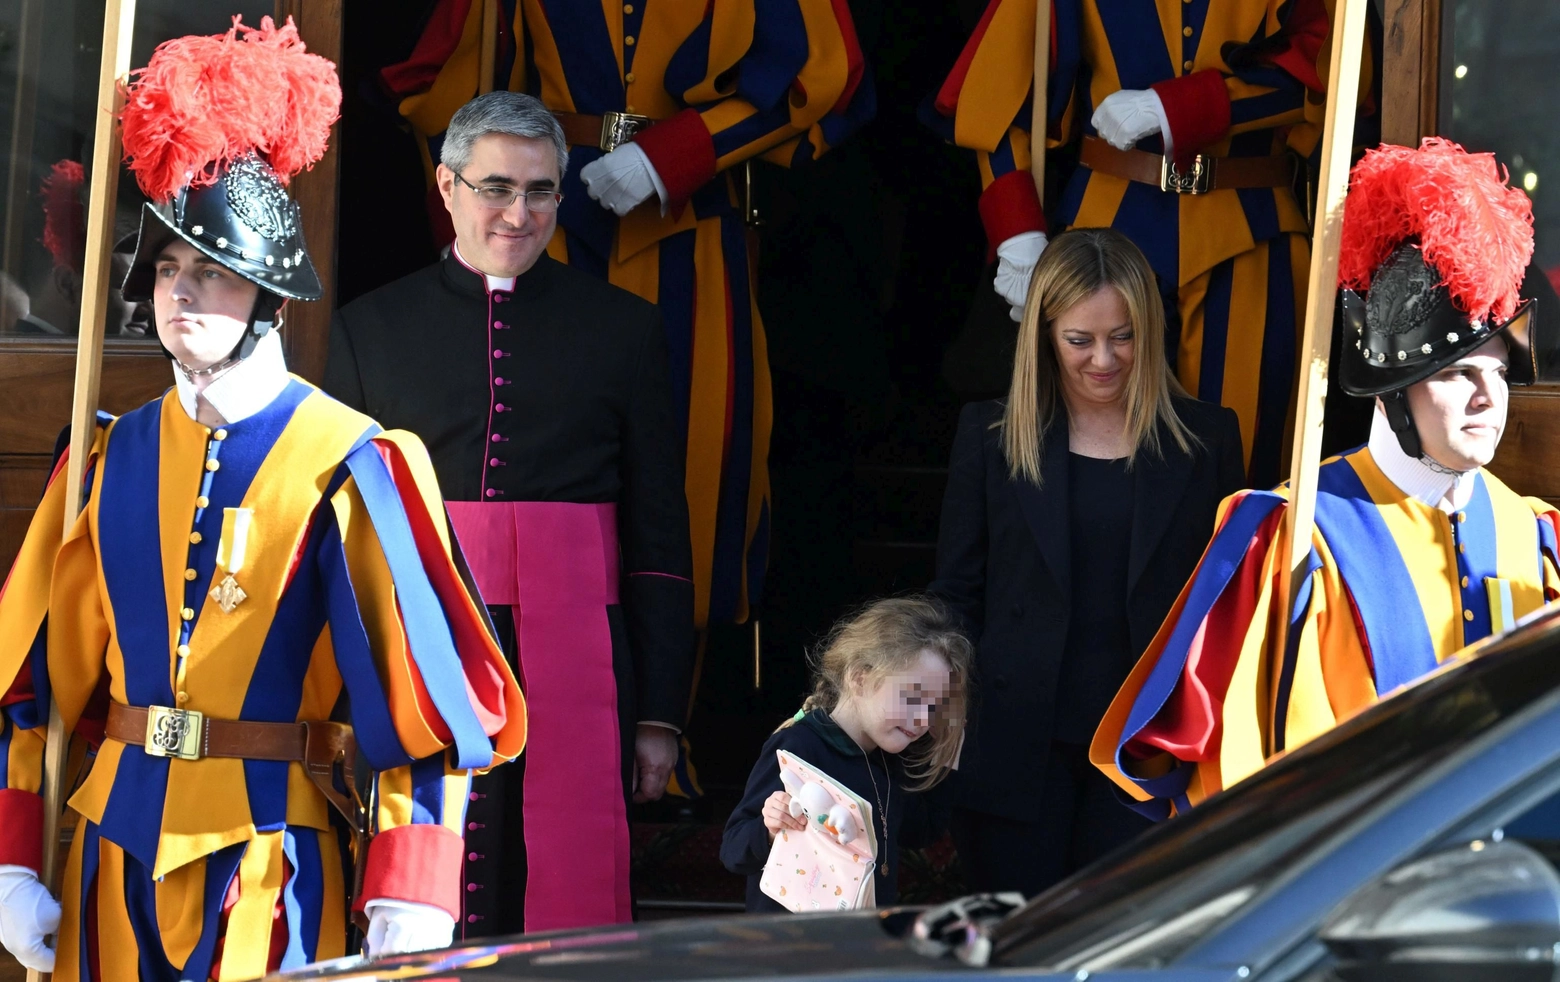 Ginevra, the daughter of Italian Prime Minister, Giorgia Meloni (R), as she arrives at San Damaso Court with her mother and his father Andrea Giambruno for a meeting with Pope Francis at the Vatican, 10 January 2023. ANSA/CLAUDIO PERI